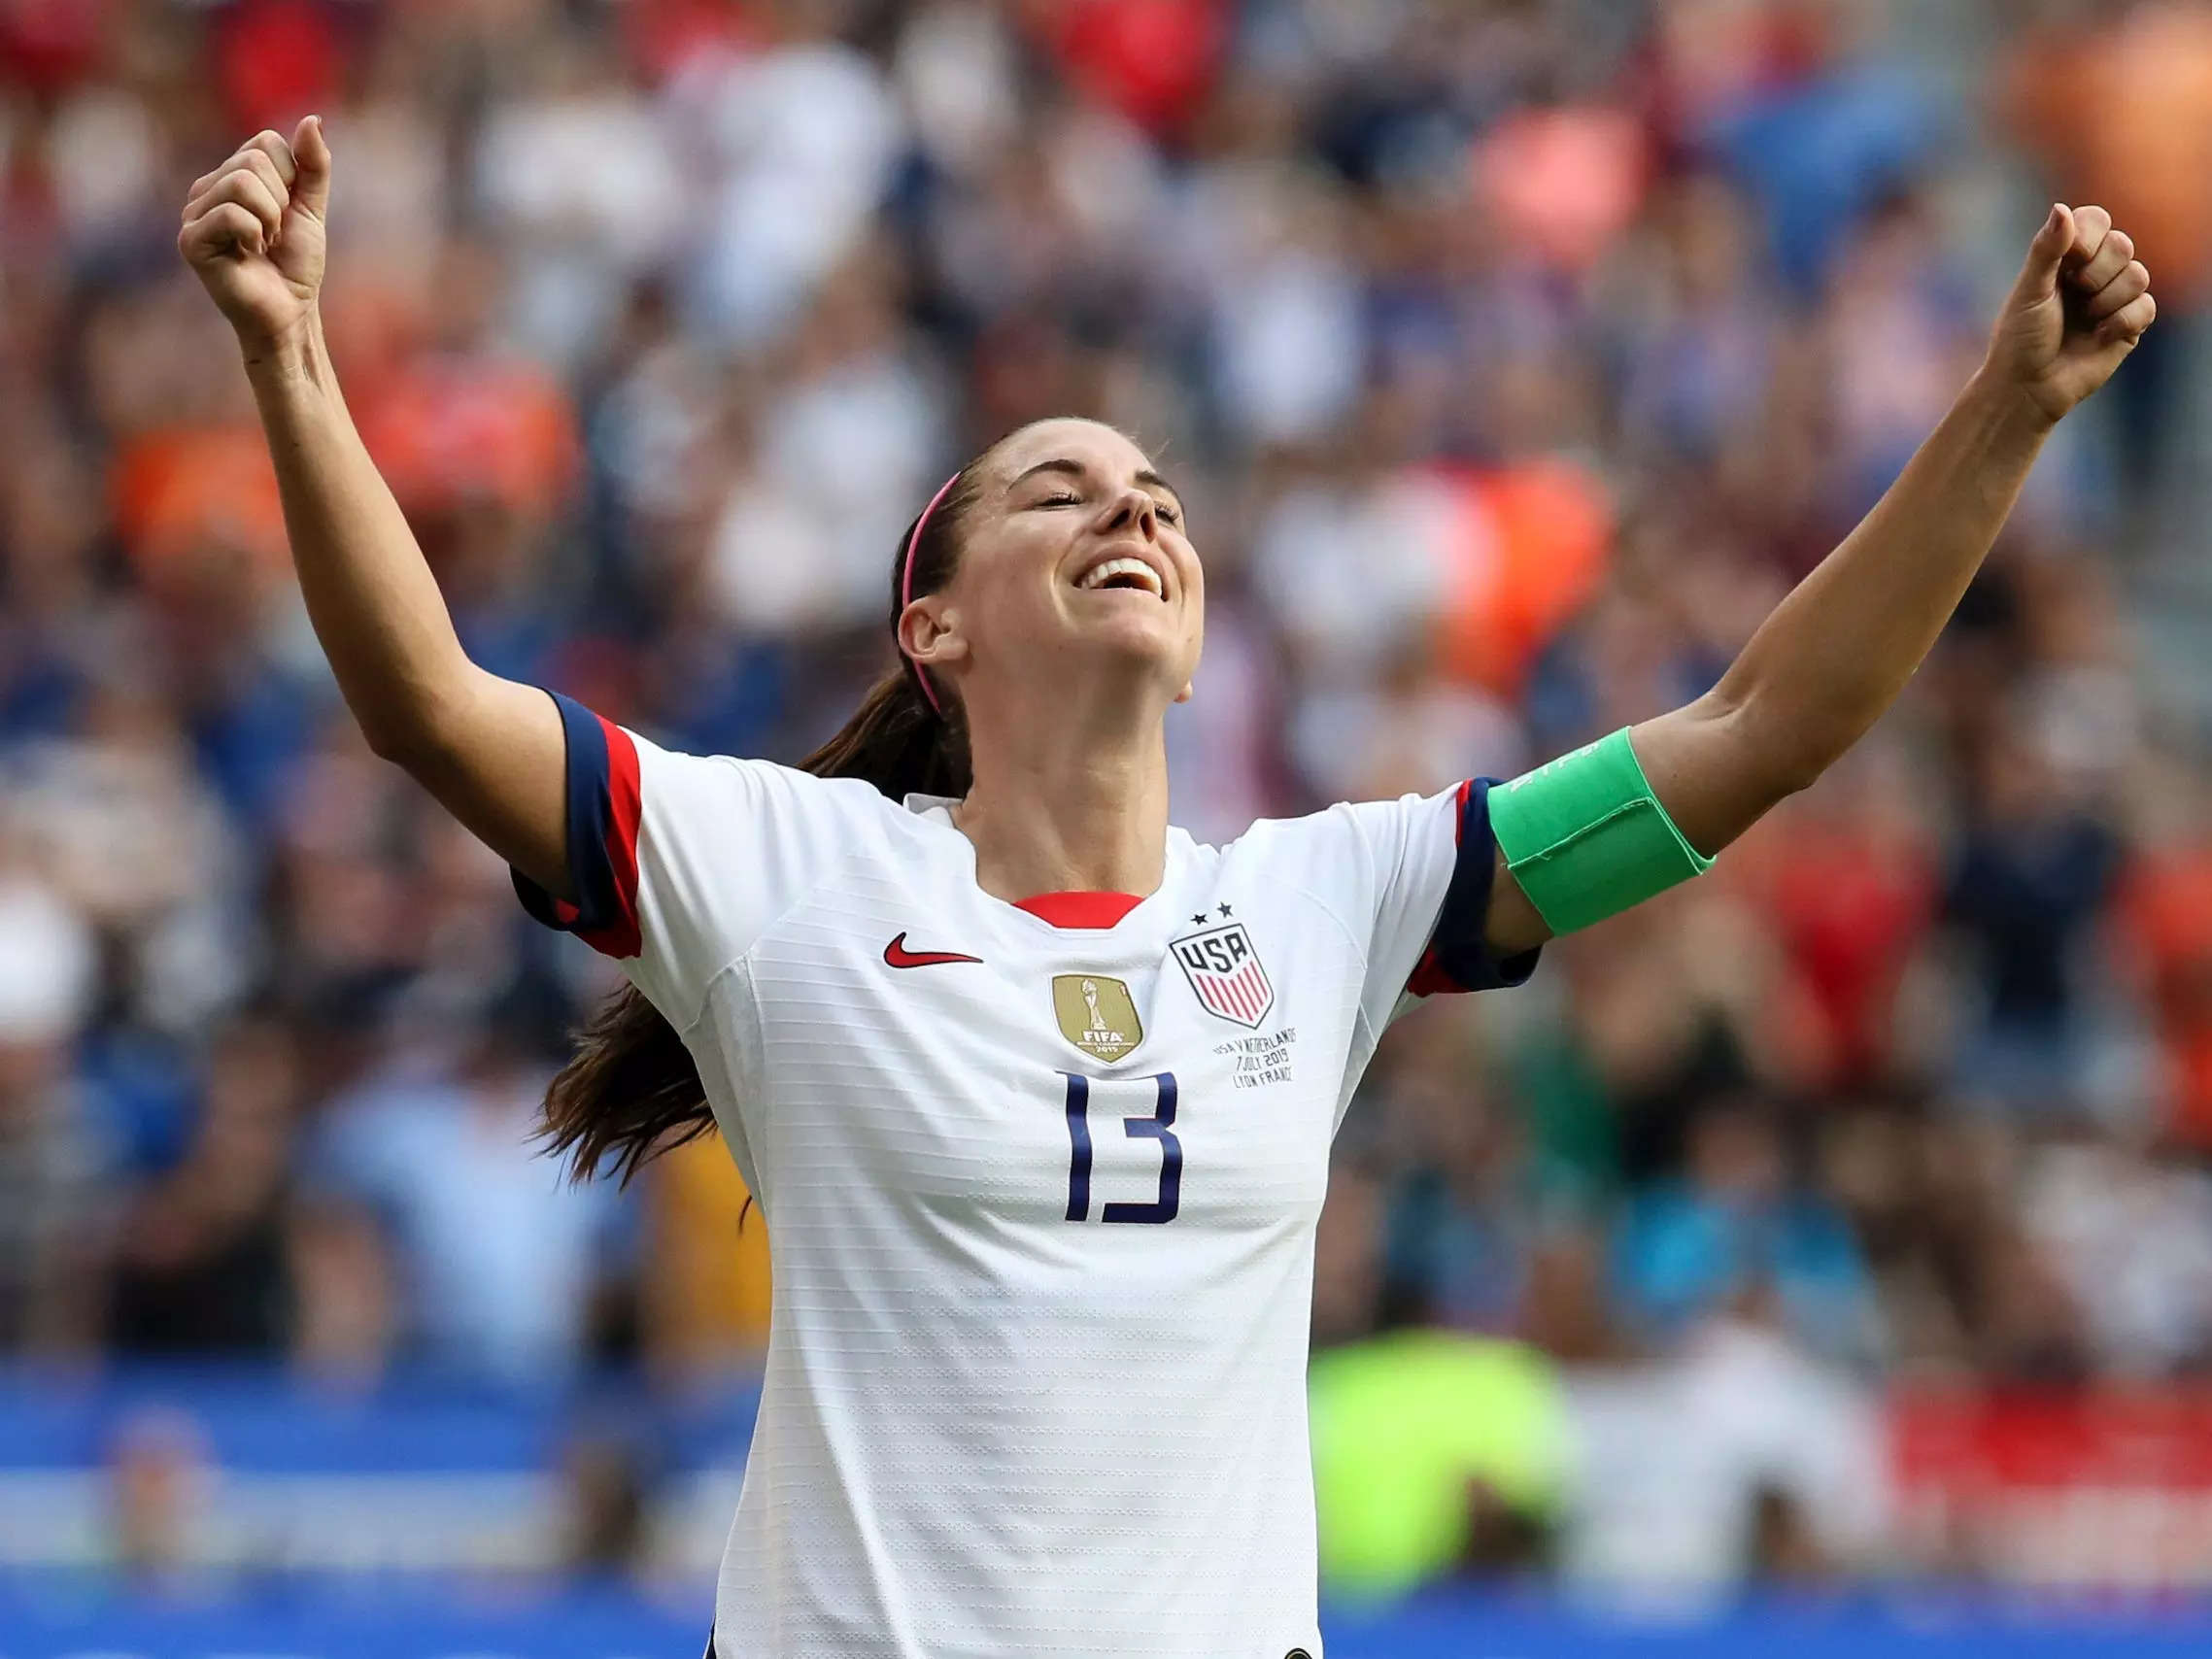 Alex says the US women's soccer team has 'really big shoes to